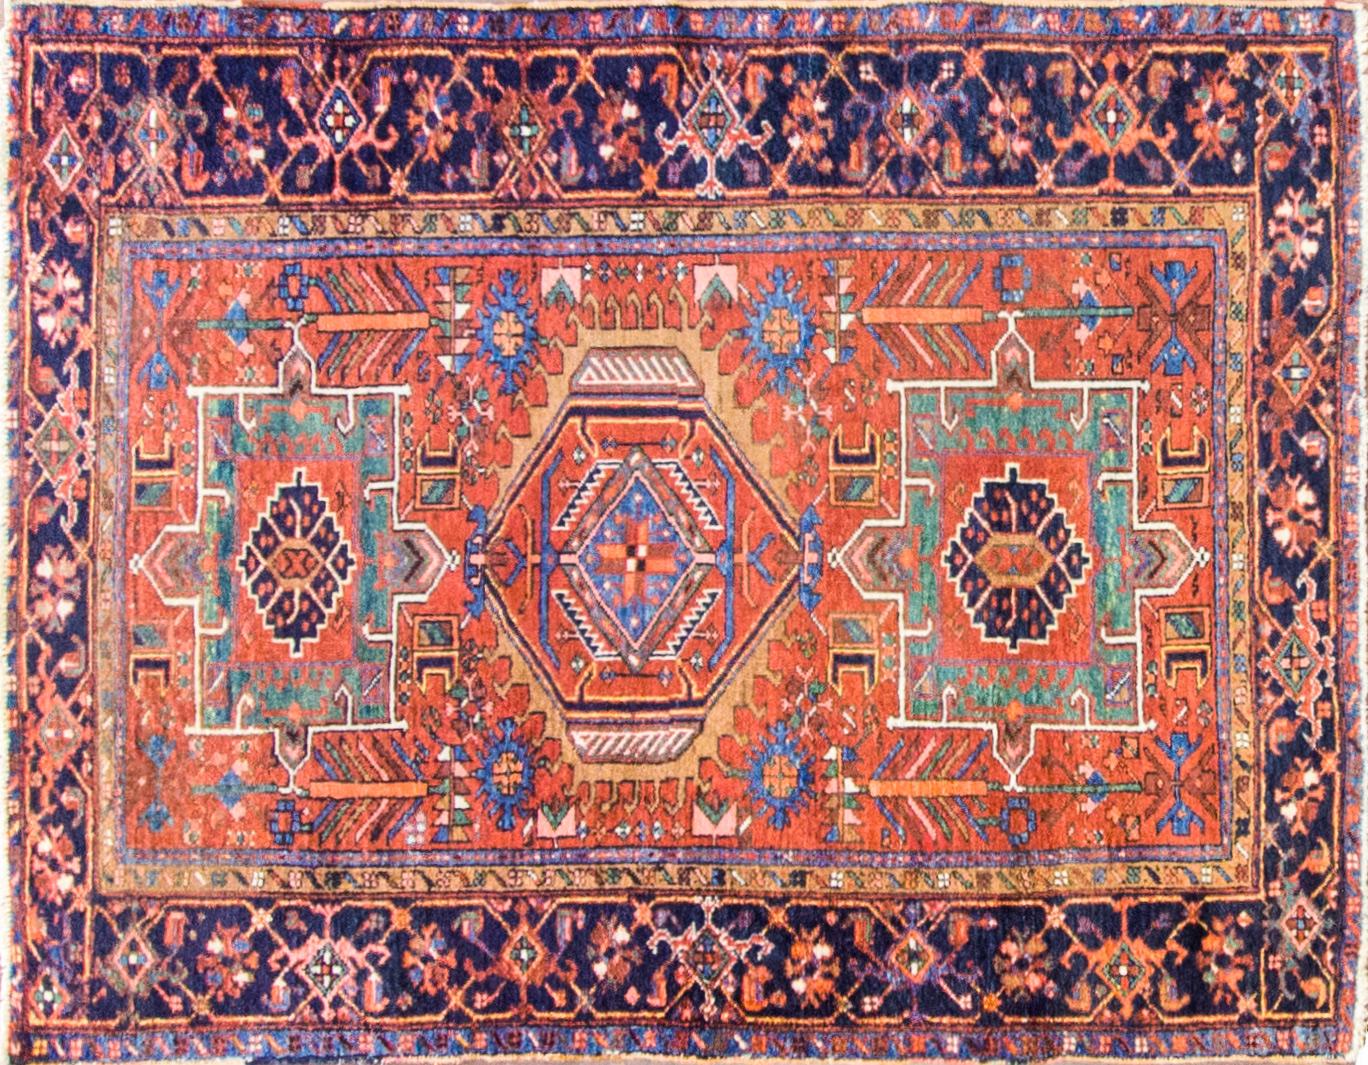 The dominating color in the older rugs is a dark shade of red. The secondary color is usually a variety of red tones tending towards orange. Green is almost always used as an accent. In keeping with the color tends in western countries, the newer